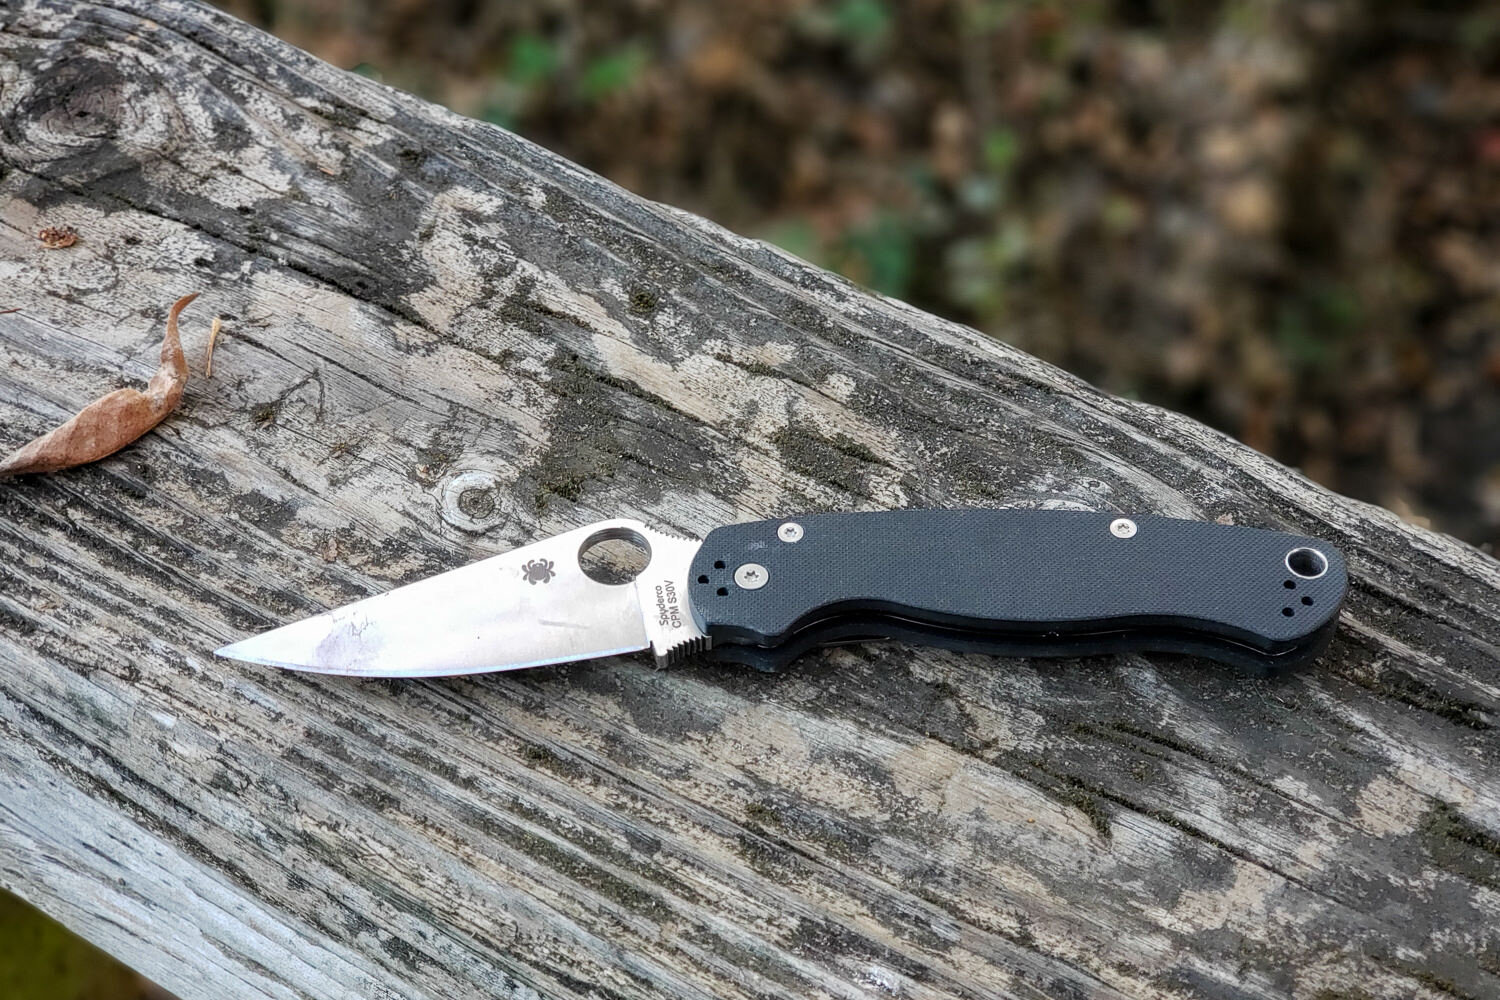 The Spyderco Para Military 2 is a handsome & capable pocket Knife that can take on the world